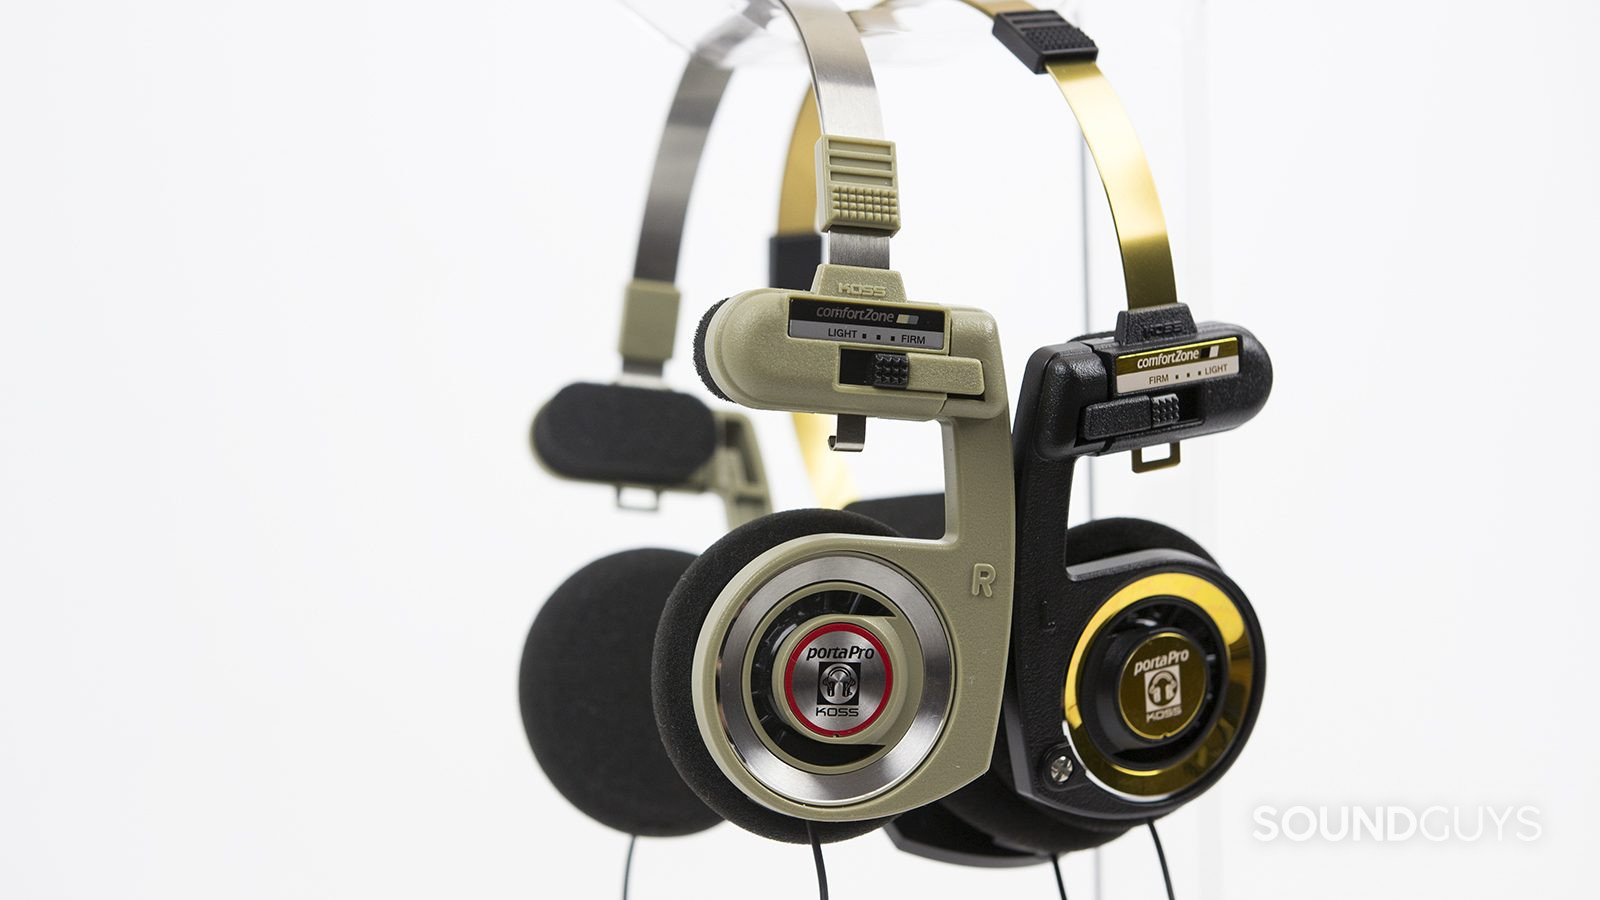 The Koss Porta Pro Limited Edition next to the original designed headset.